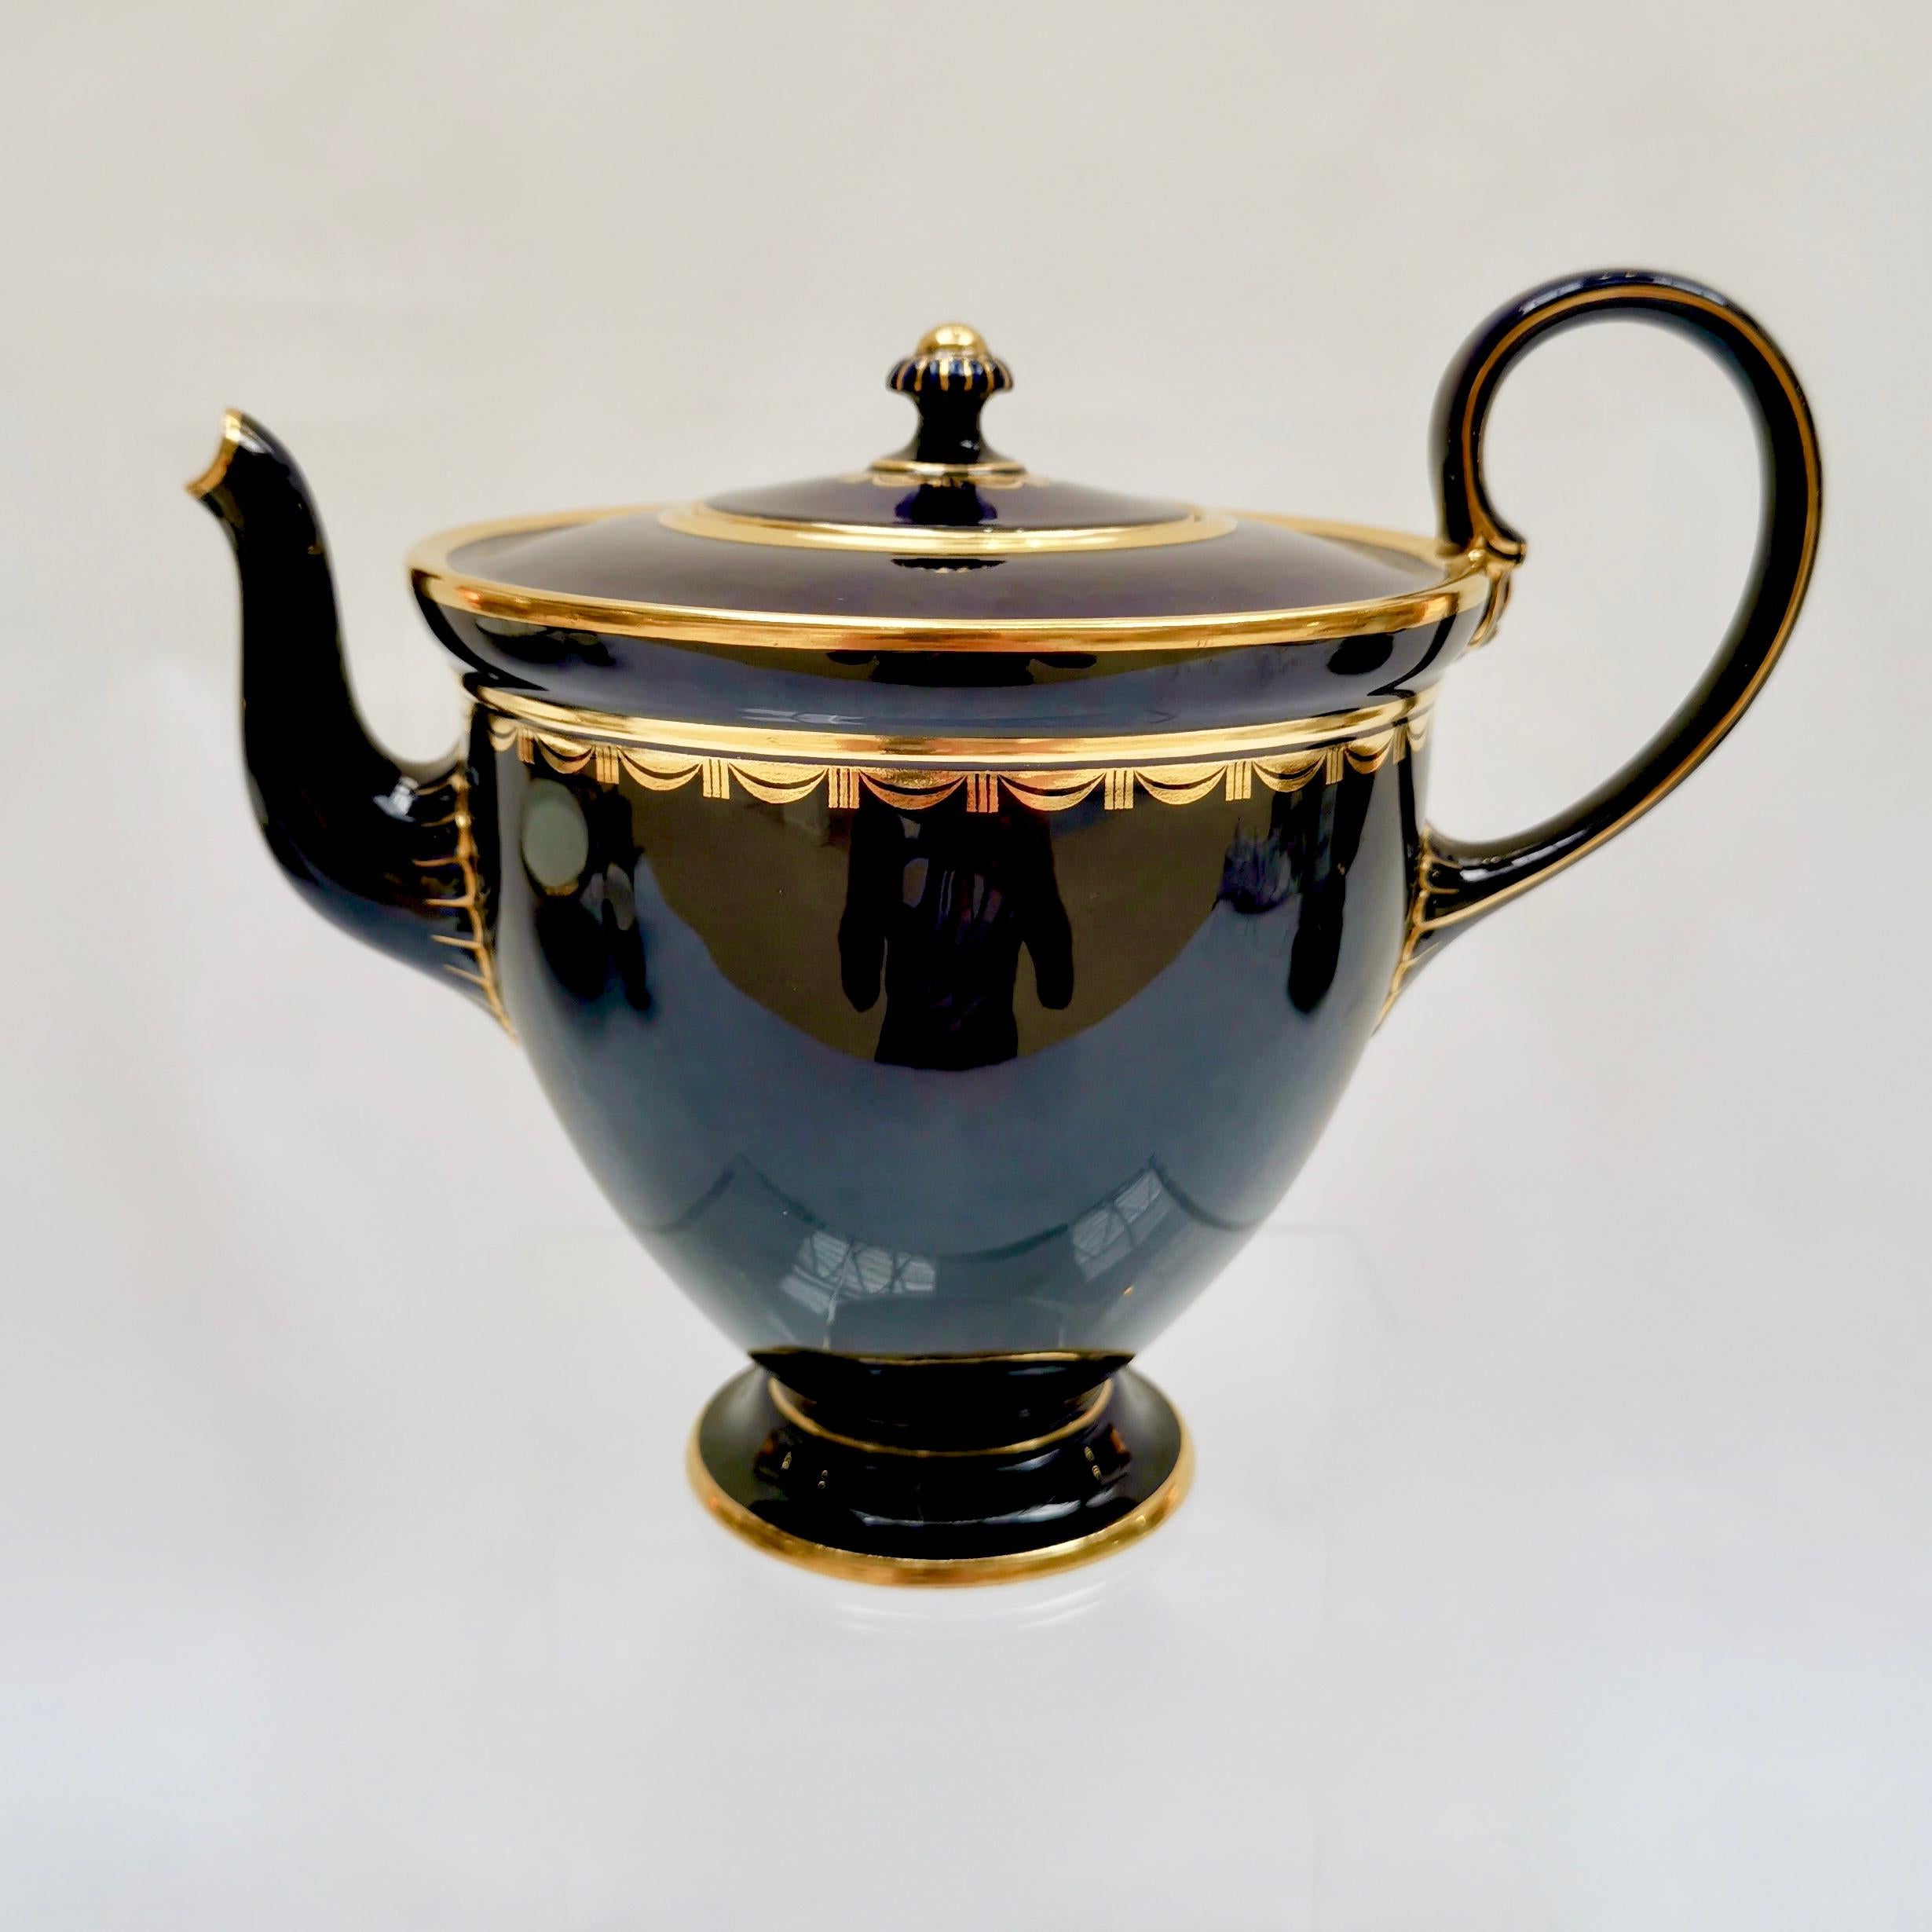 On offer is a stunning Sèvres tea service for 6 in the elegant Art Deco style, made in 1923.

Sèvres Porcelain is among the most famous in the world. The French factory started in the 1740s in Vincennes, to be moved to Sèvres in the 1750 under the